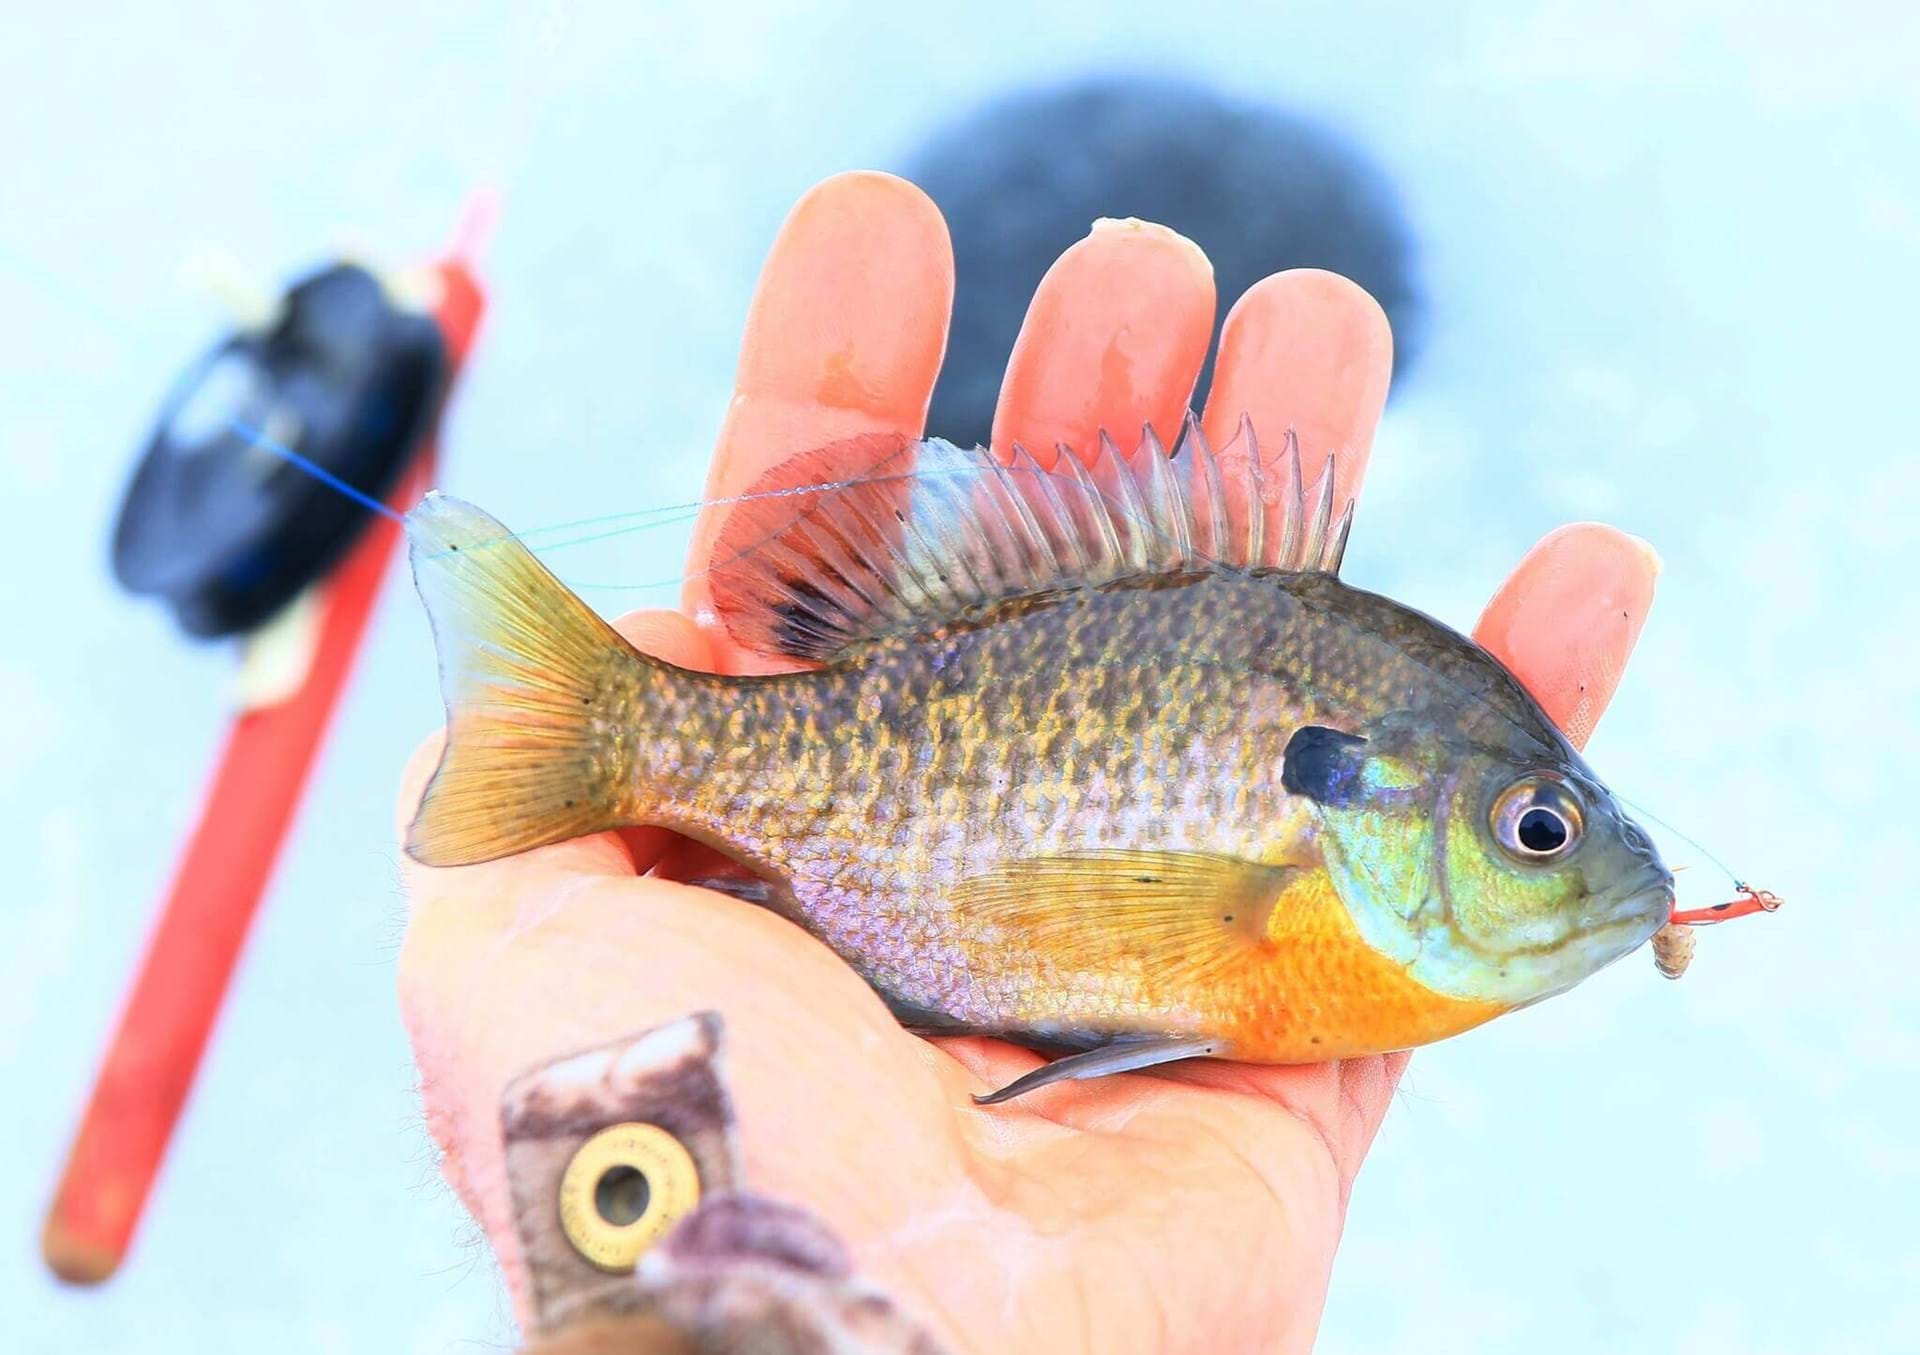 A bluegill is held after being caught during ice fishing